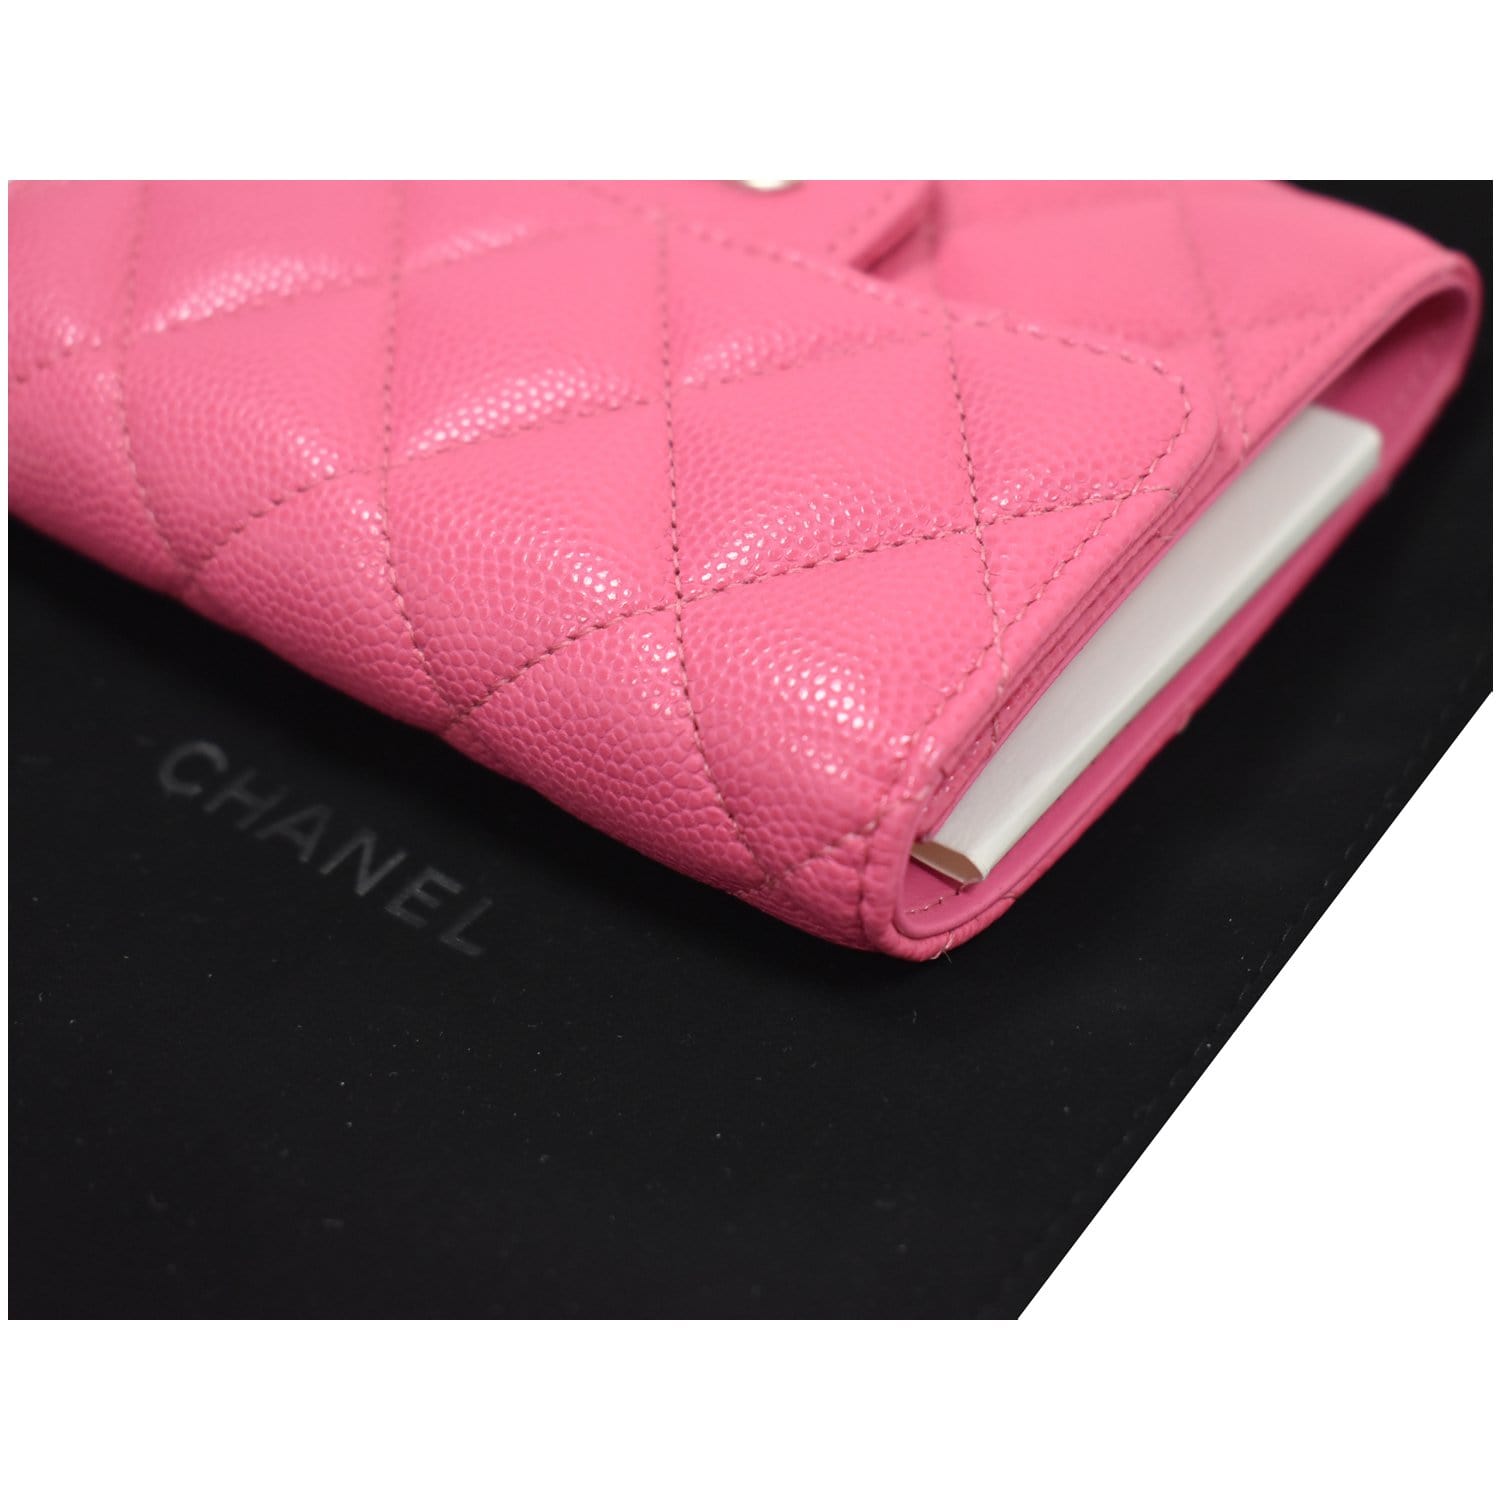 Chanel CC Card Holder Caviar Quilted Leather Flap Wallet